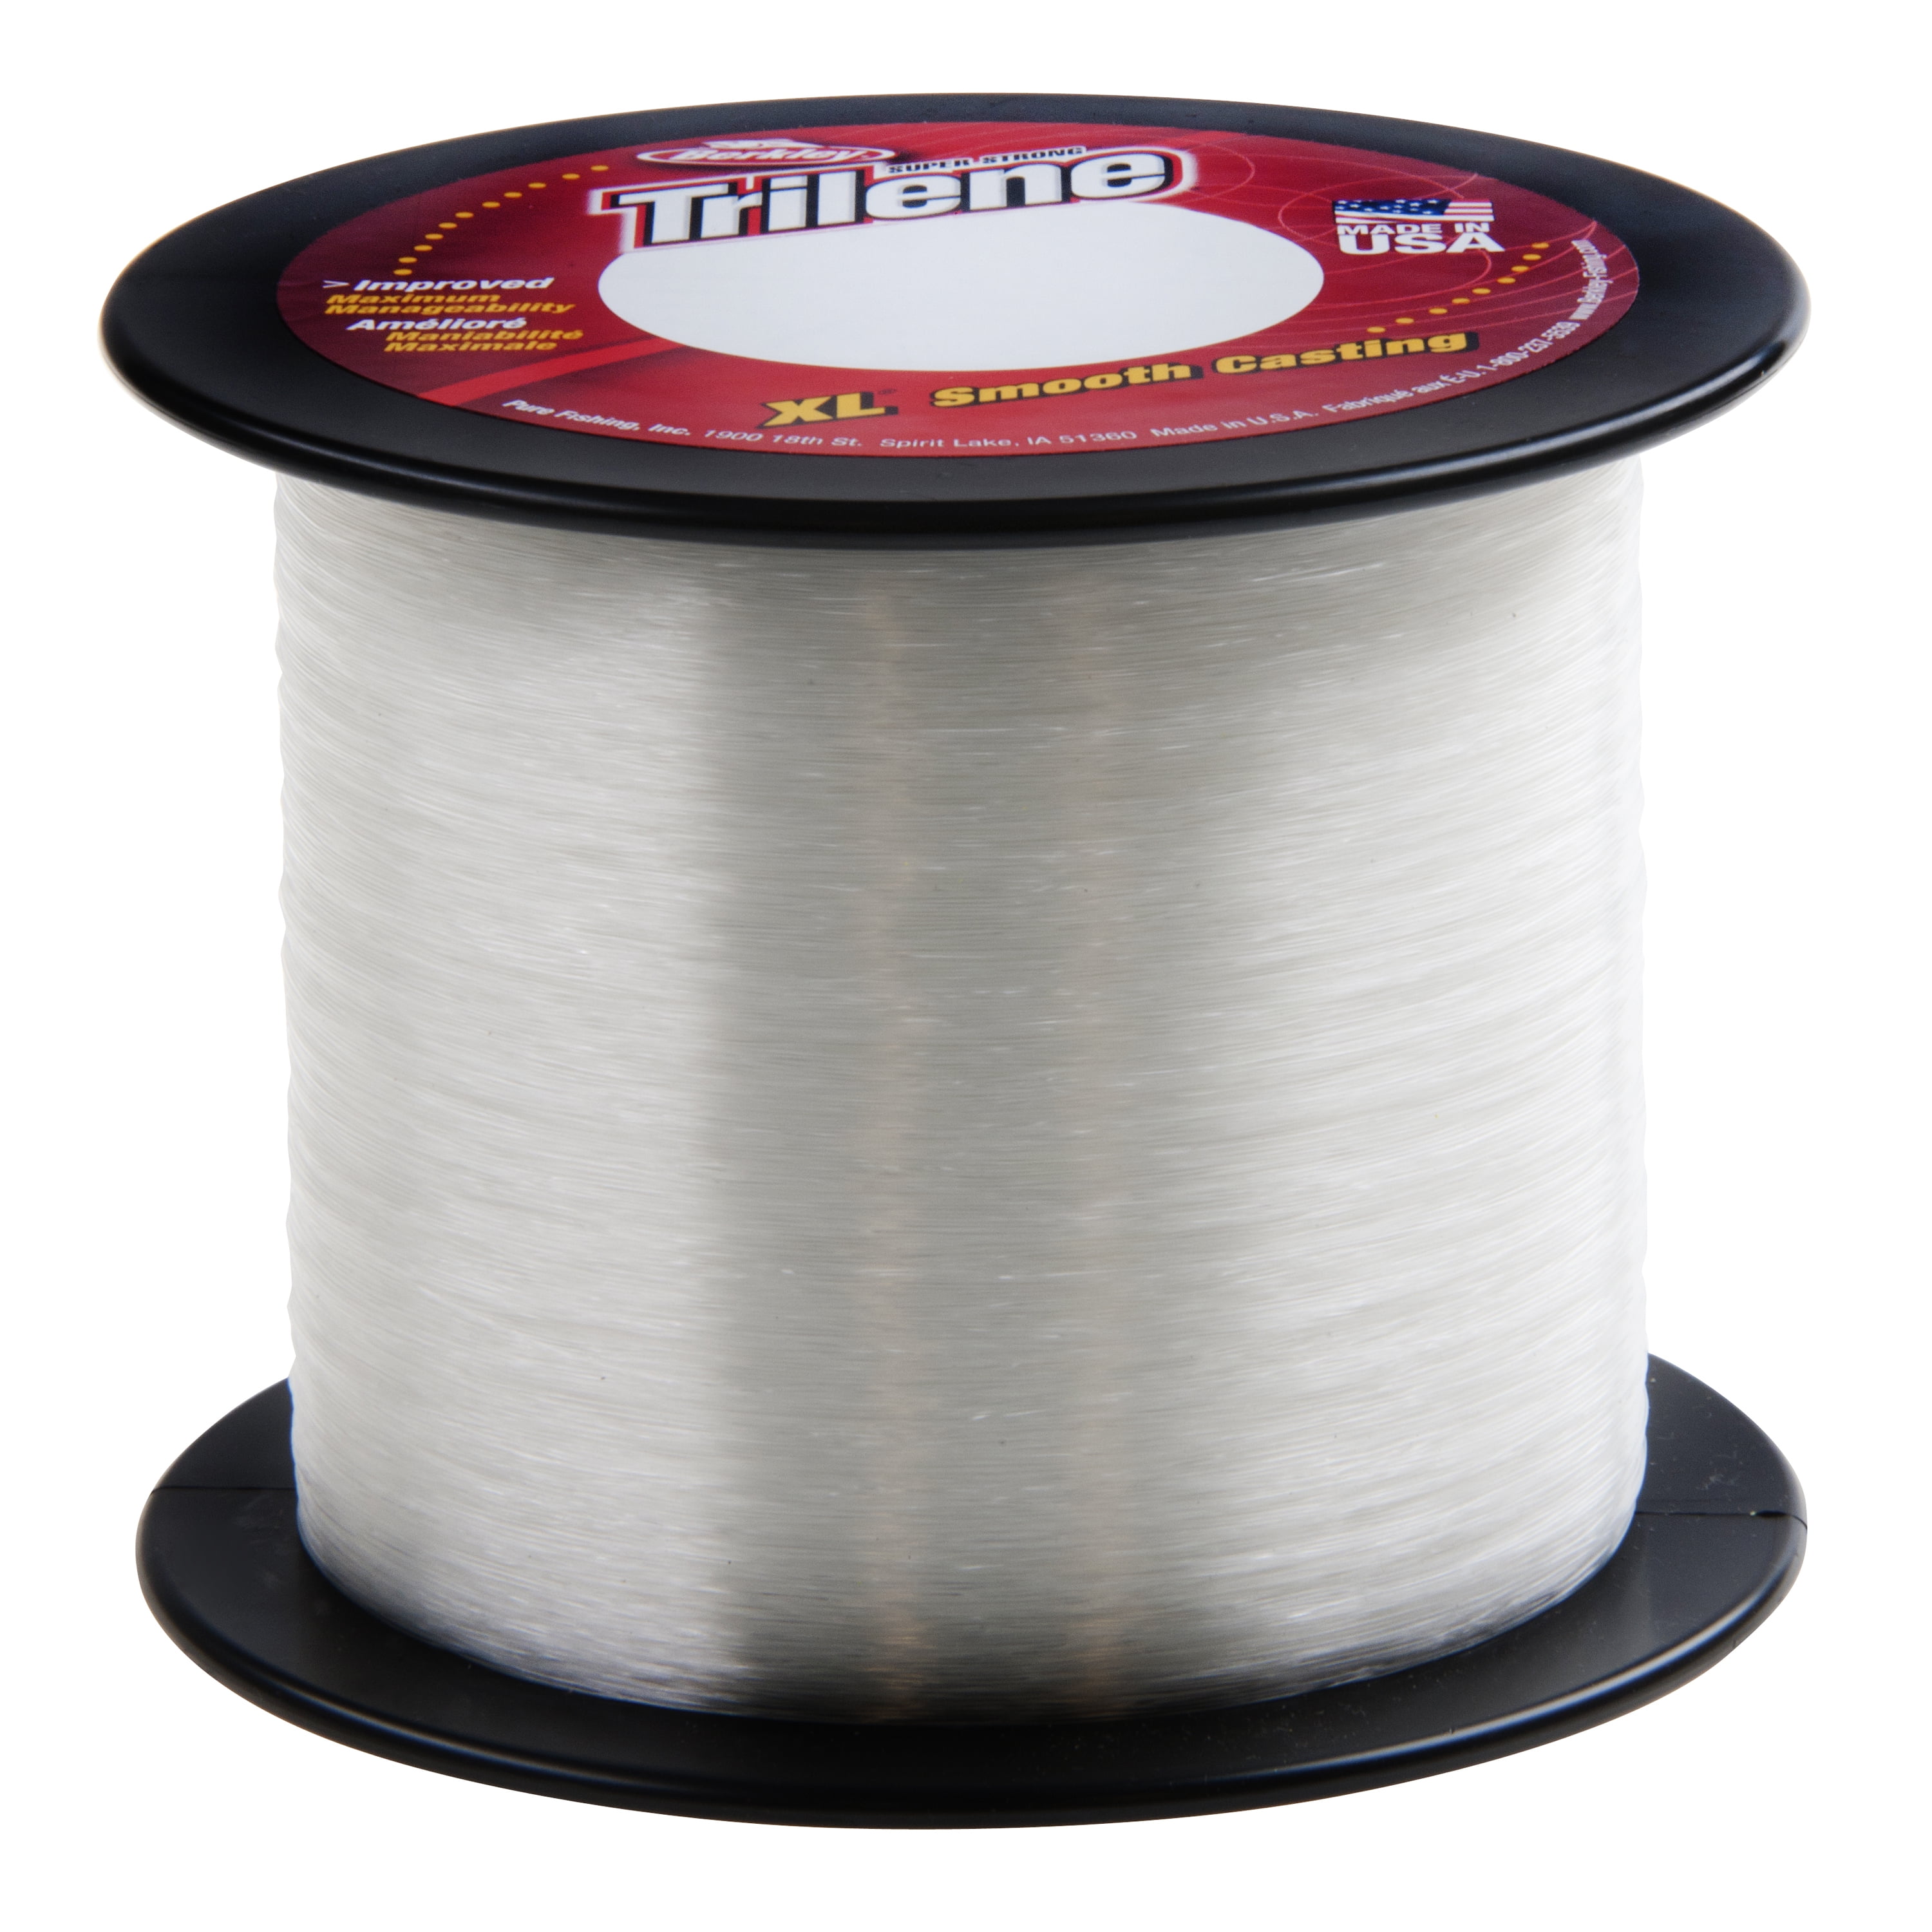 Berkley Flex SS Monofilament Fishing Lines - Strong, Low Memory, Easy to  Knot - Perfect for The Starting Angler, Choose from Many Fishing Styles and